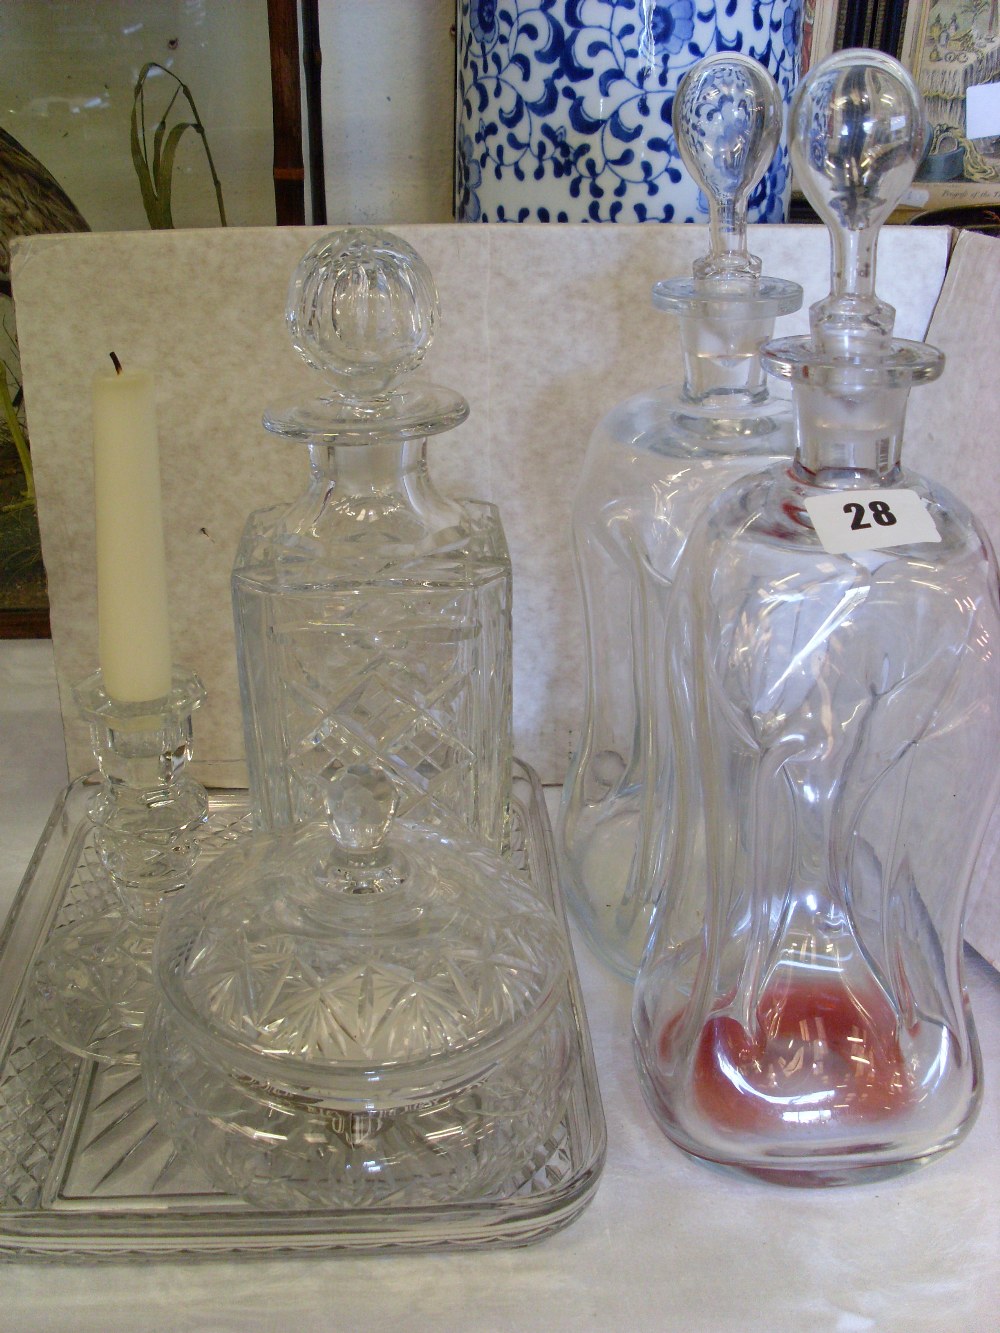 Pair of decanters, another decanter, cut glass tray etc.